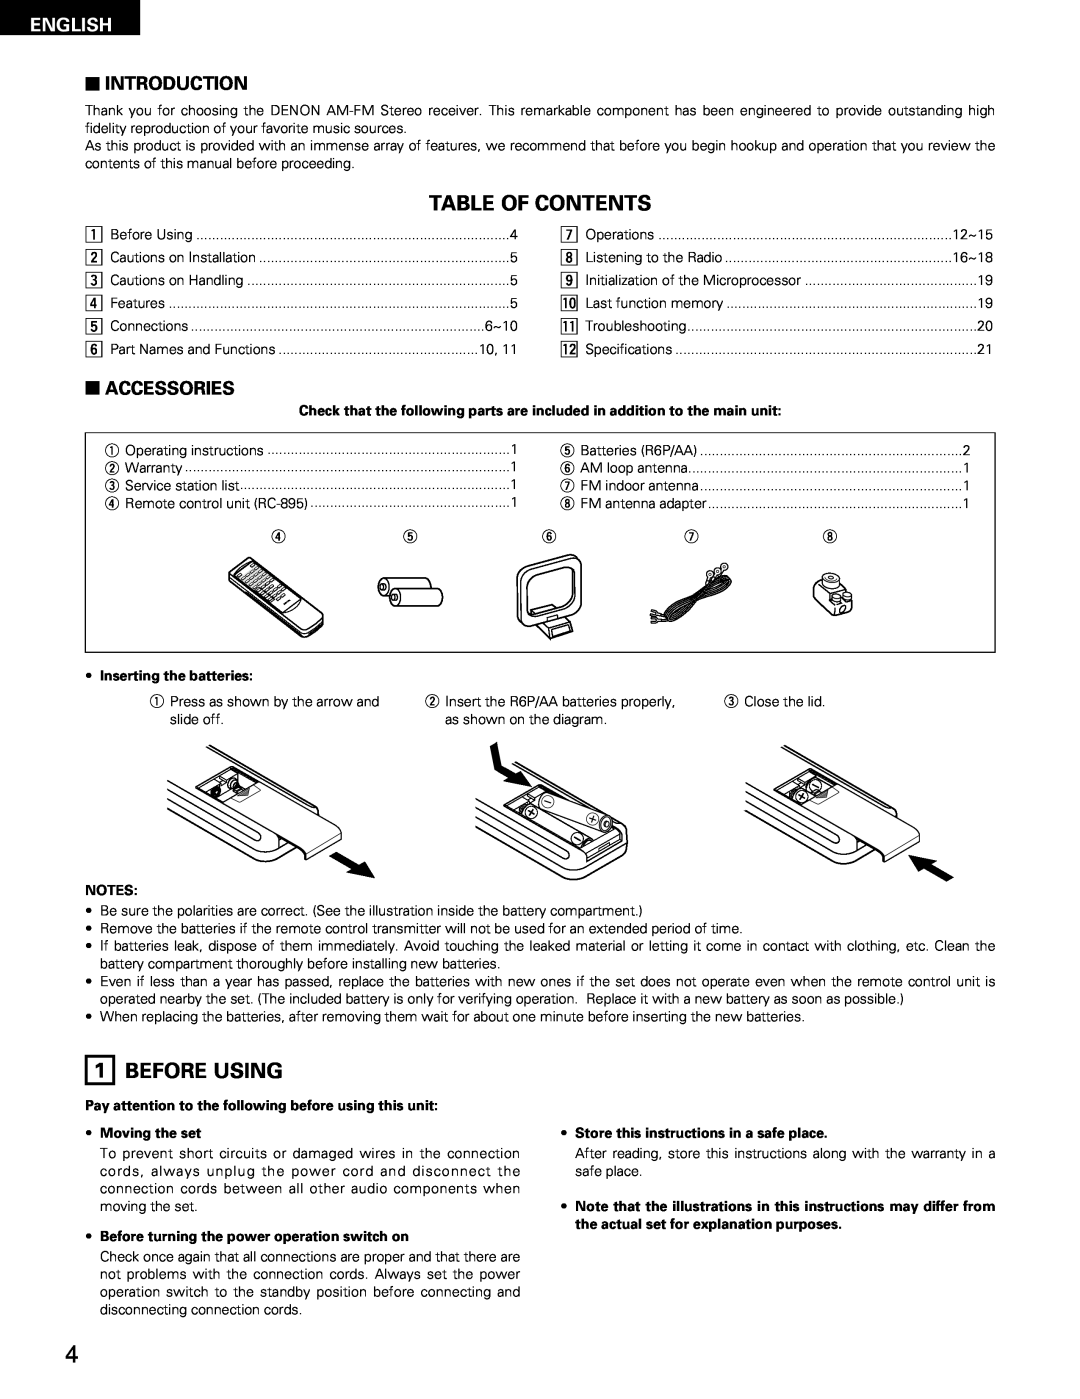 Denon DRA-295 manual Table Of Contents, Before Using, English, 2INTRODUCTION, 2ACCESSORIES 